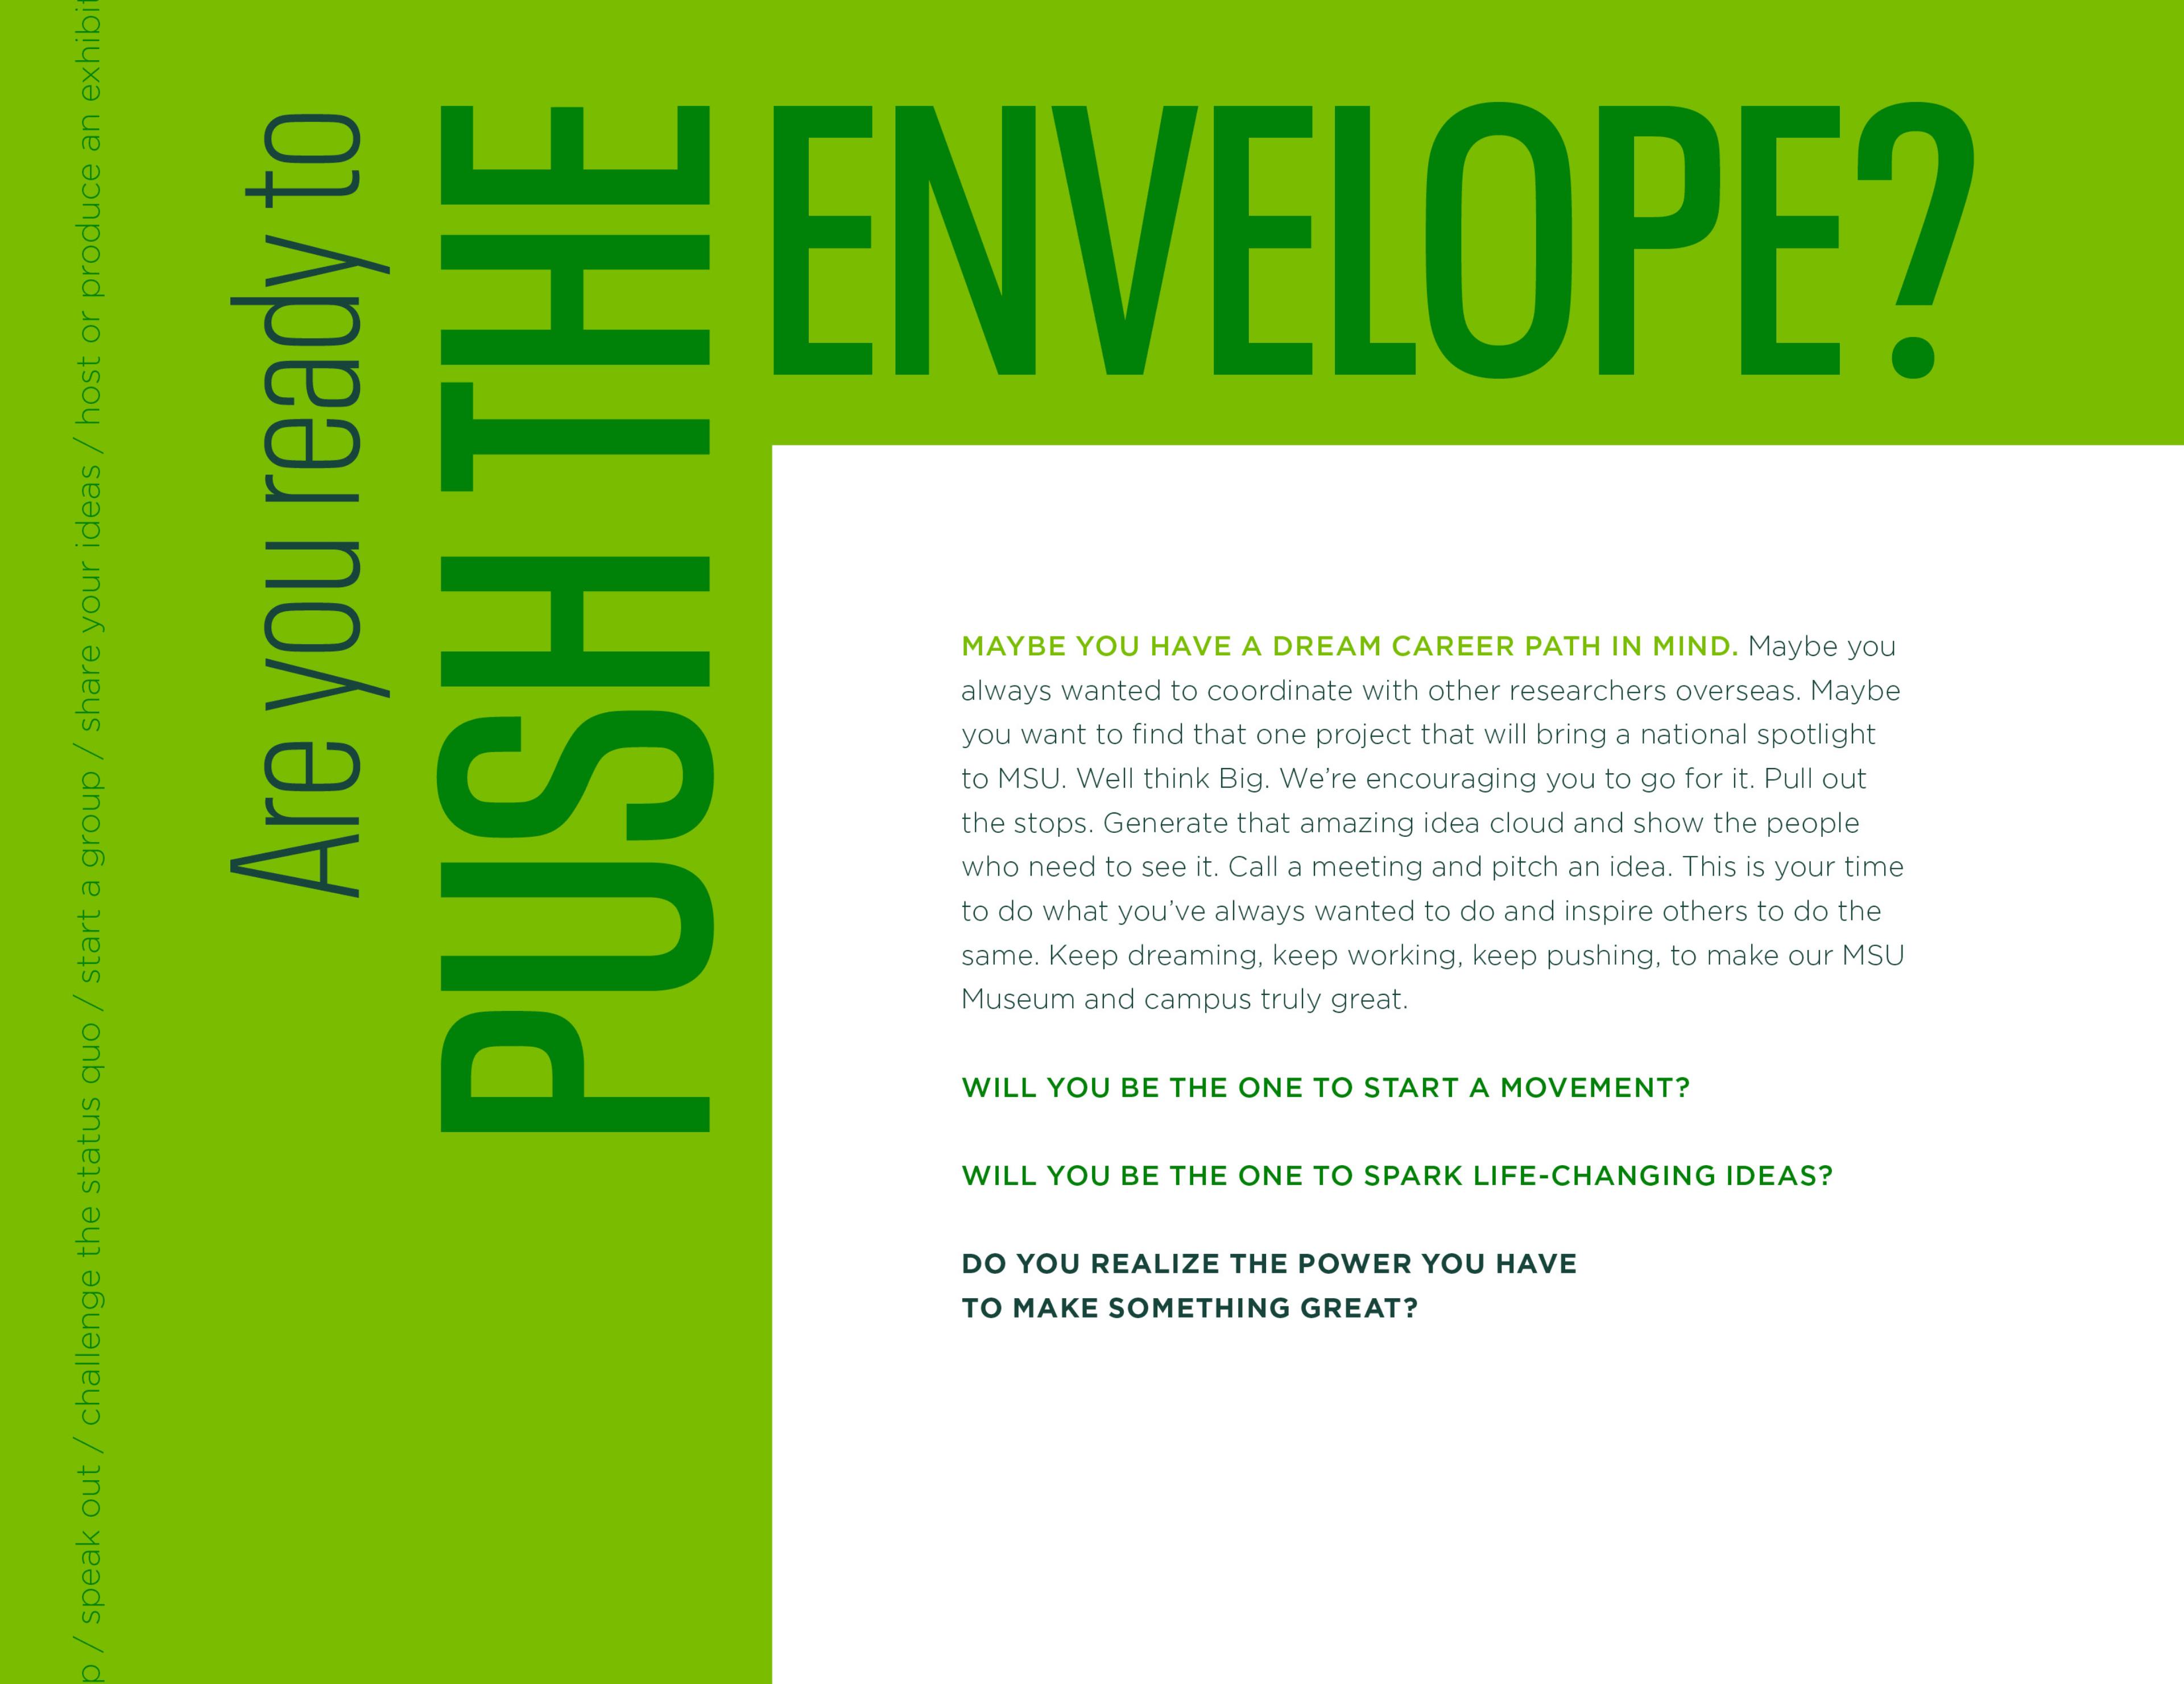 a page from the identity guide - 'Are you ready to push the envelope?'